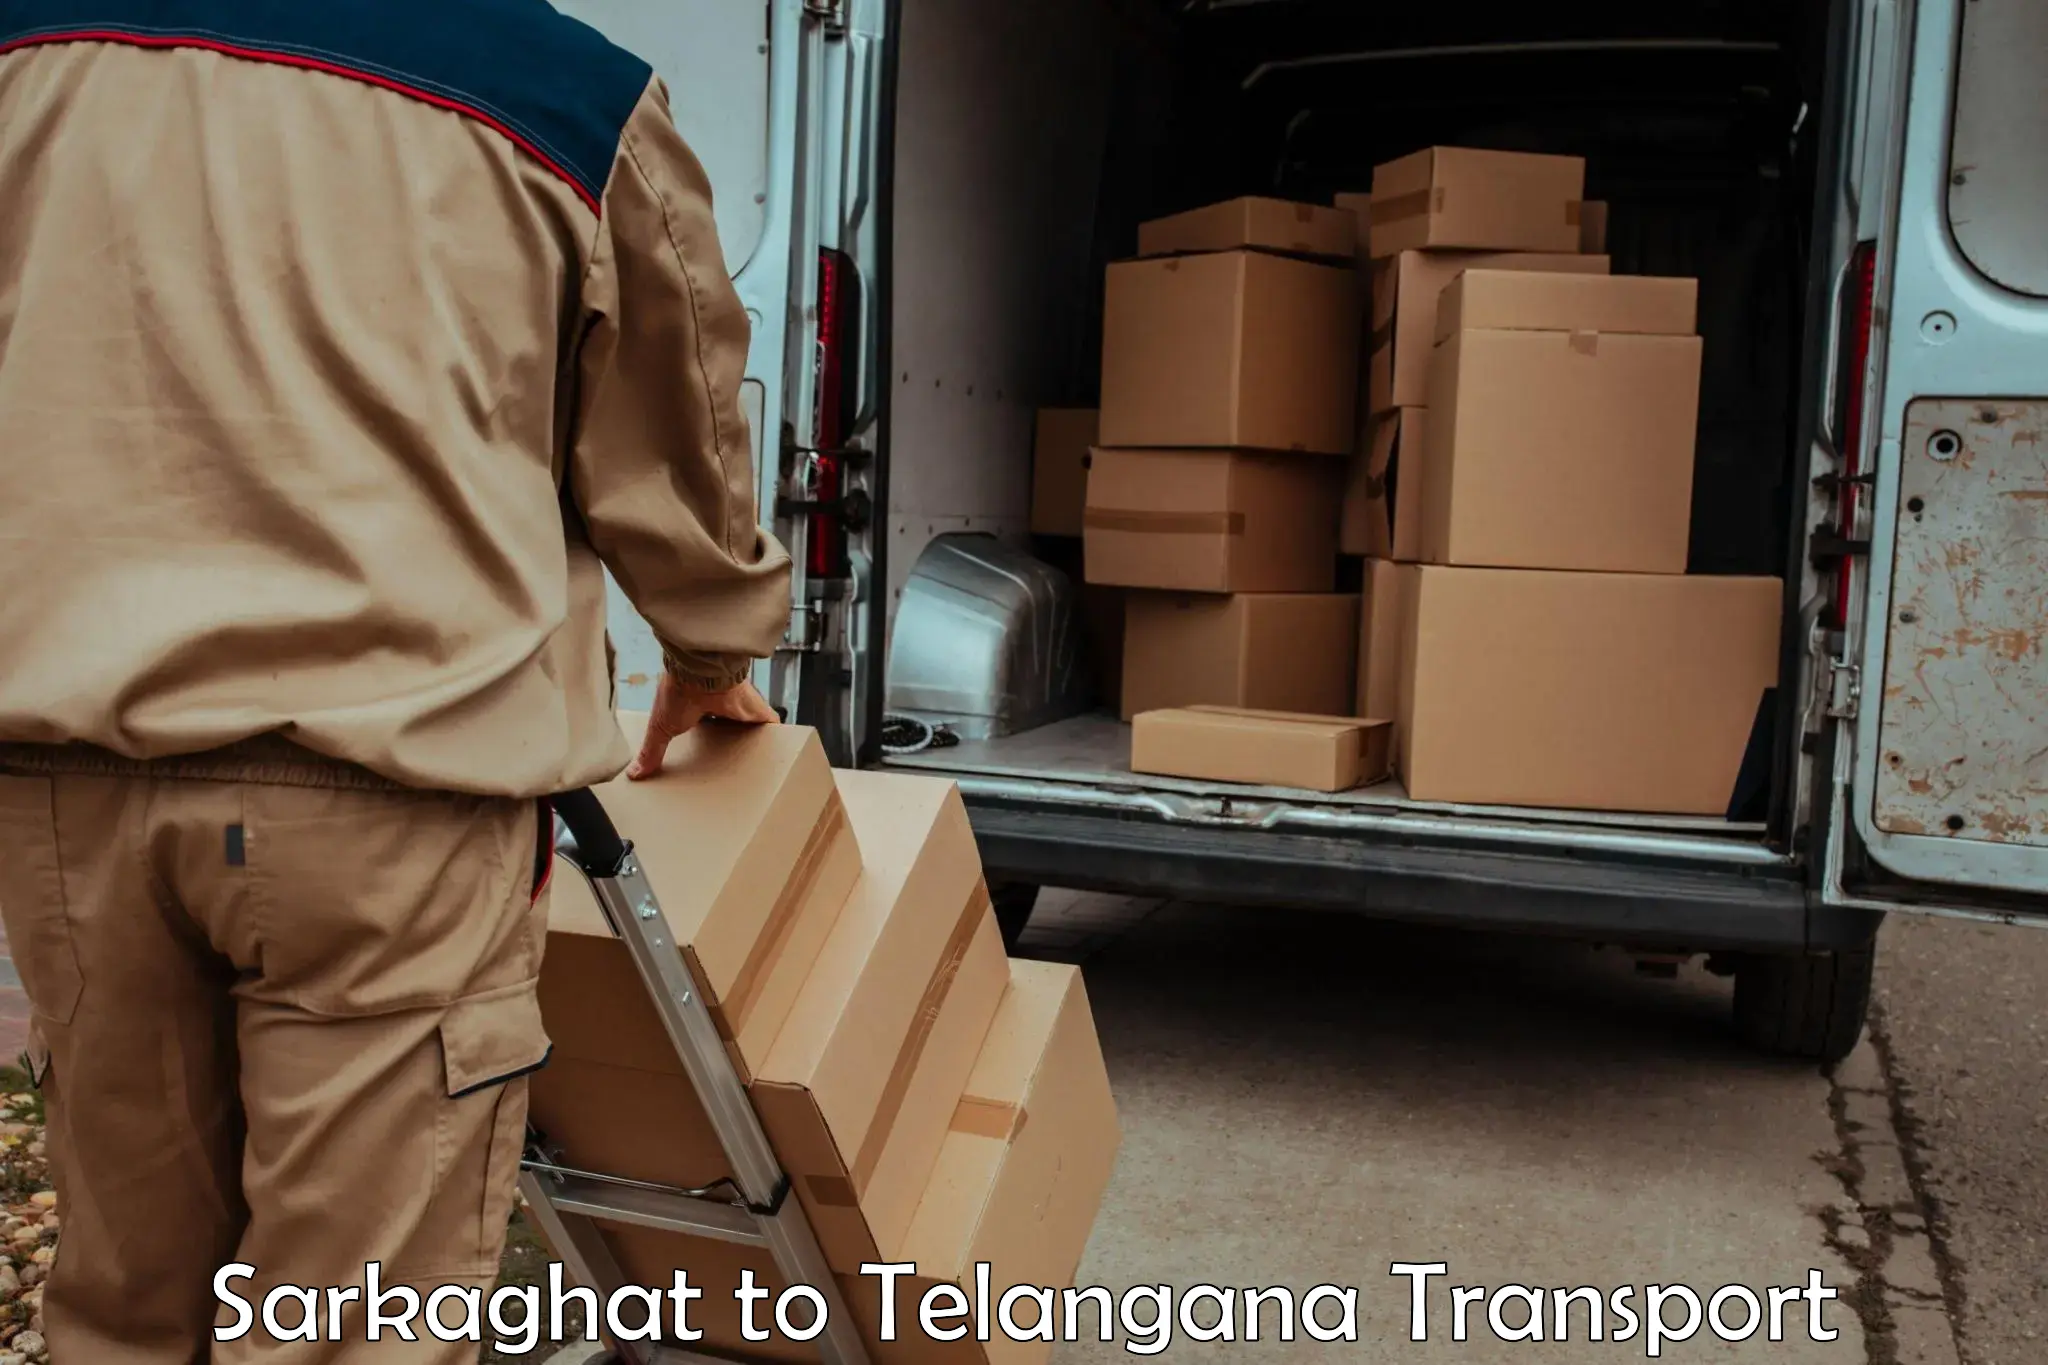 Truck transport companies in India Sarkaghat to Bhupalpally